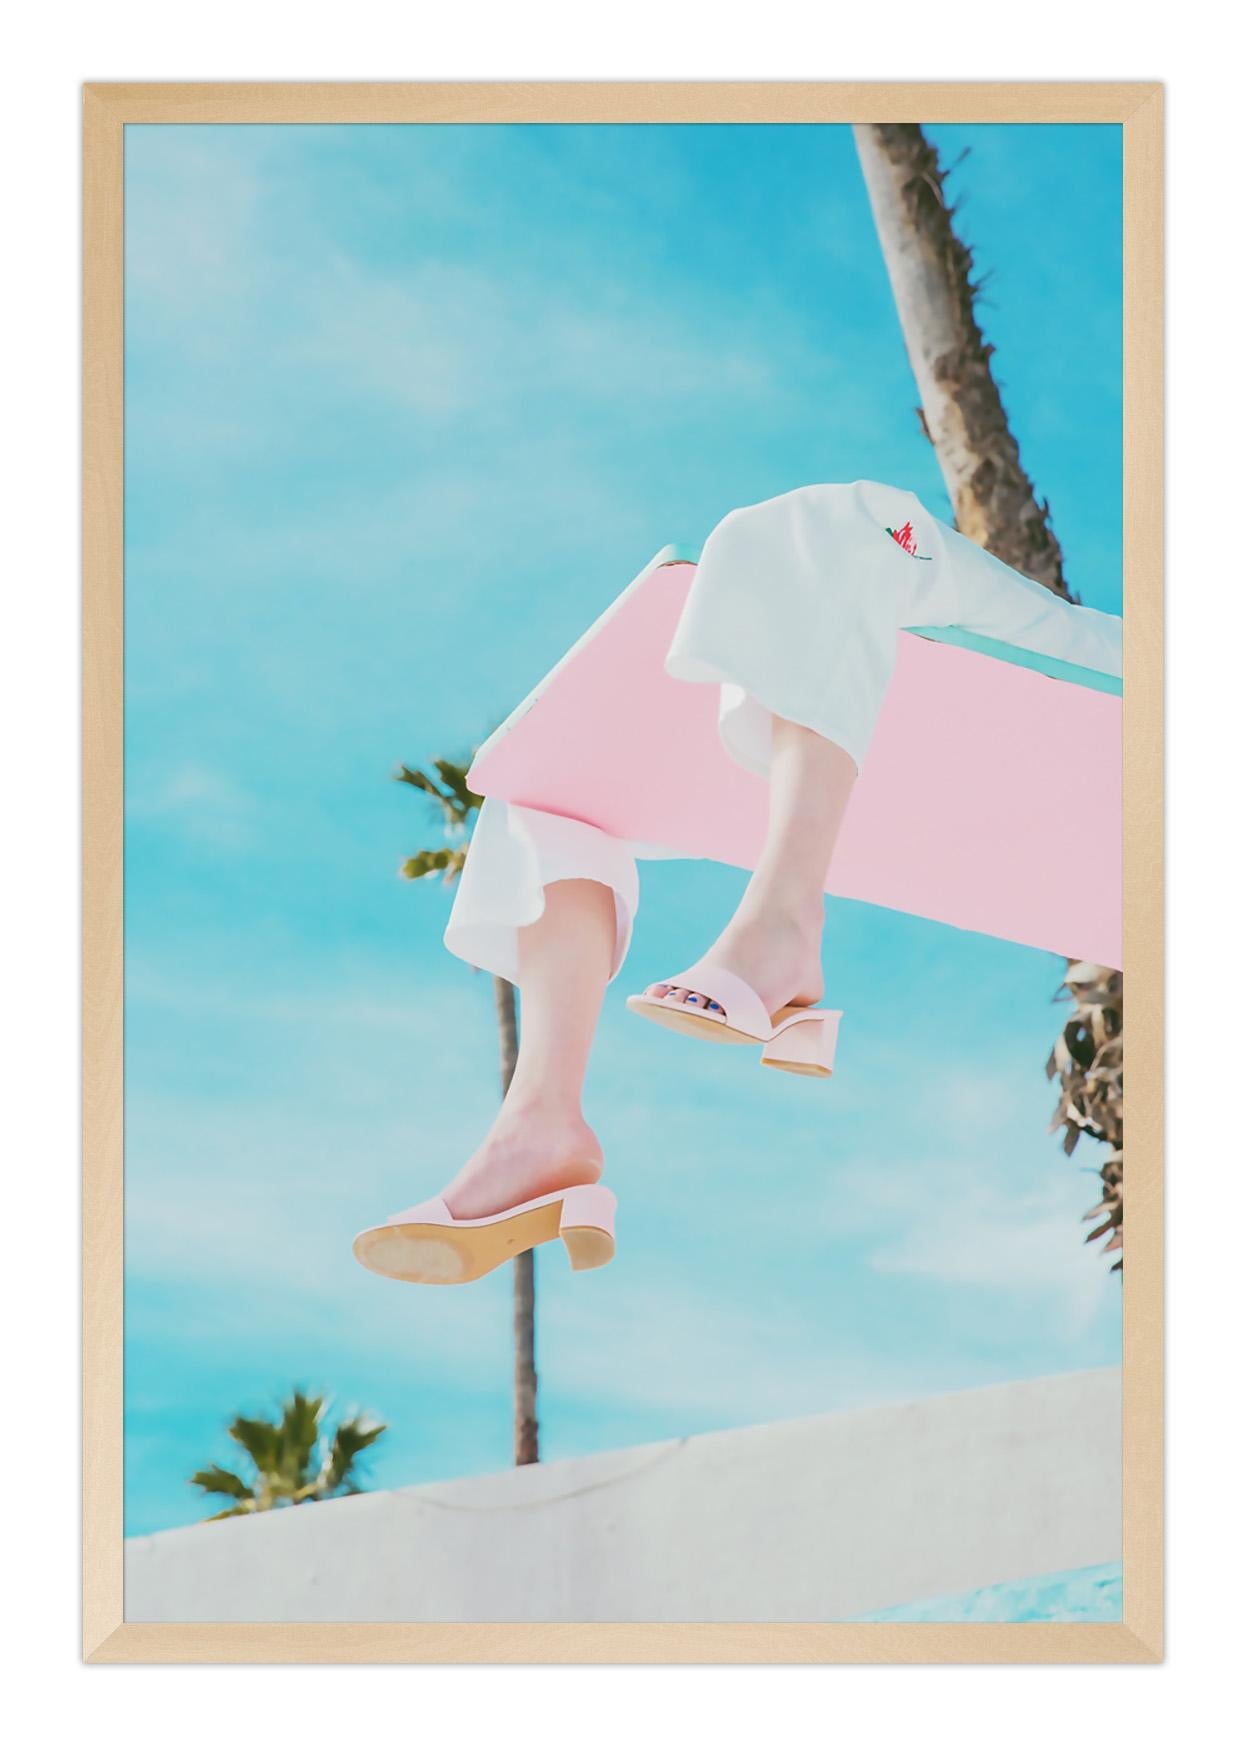 ABOUT THIS ARTIST: After years of independently creating eye-catching and award-winning work, Jesse and Jimmy Marble began collaborating together in 2016 on personal photos and short films and soon their collaborative work became the most standout